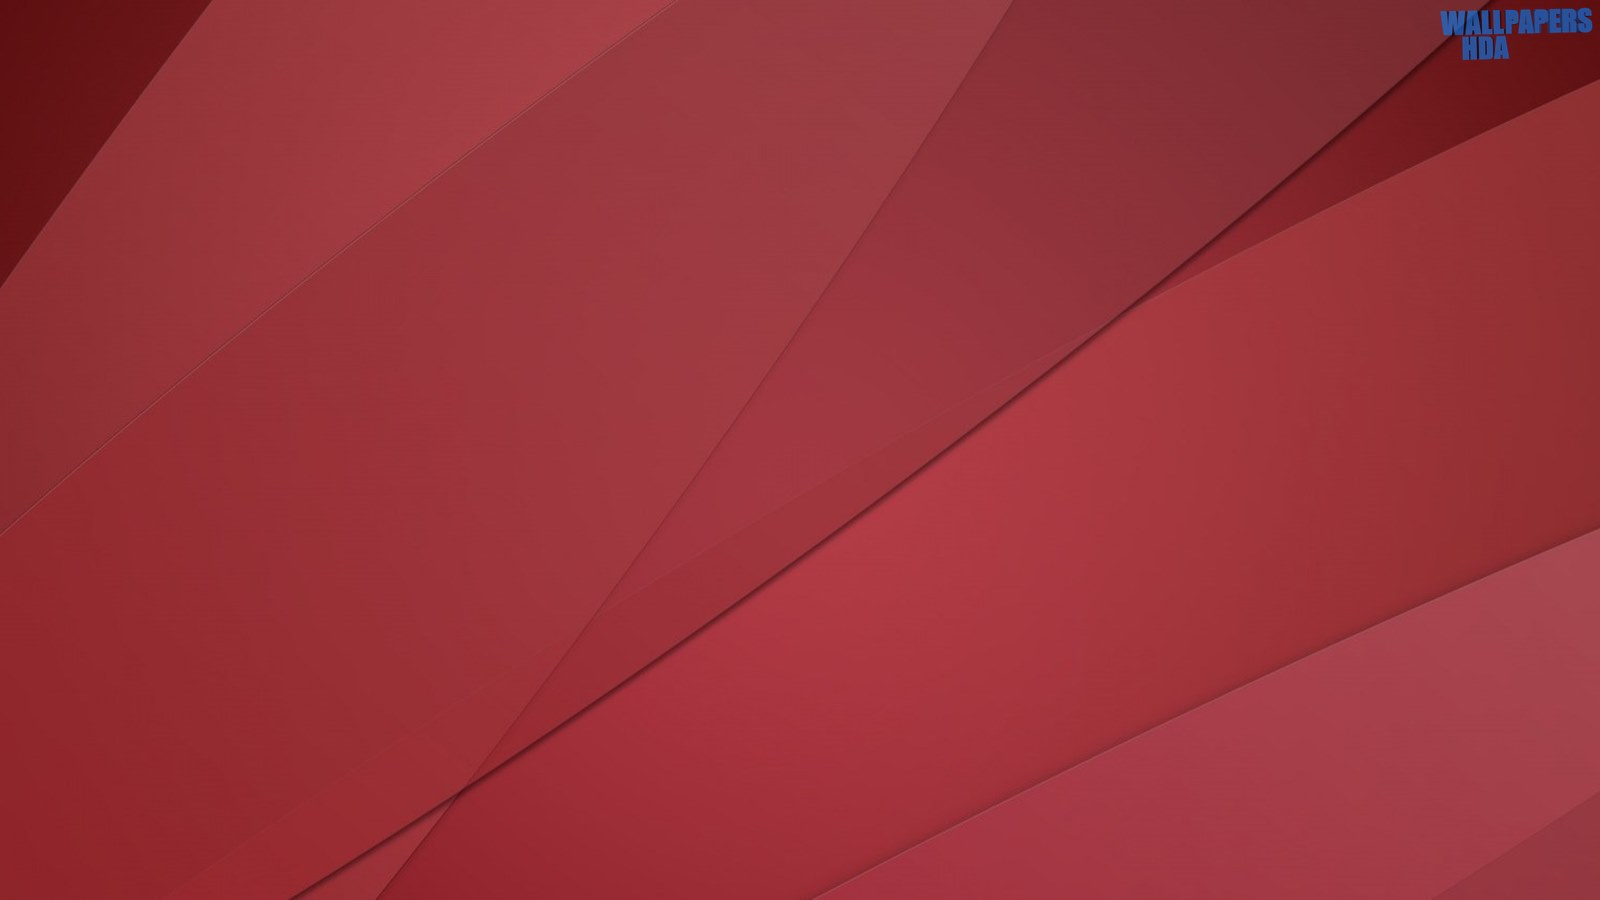 Abstract graphic design red wallpaper 1600x900